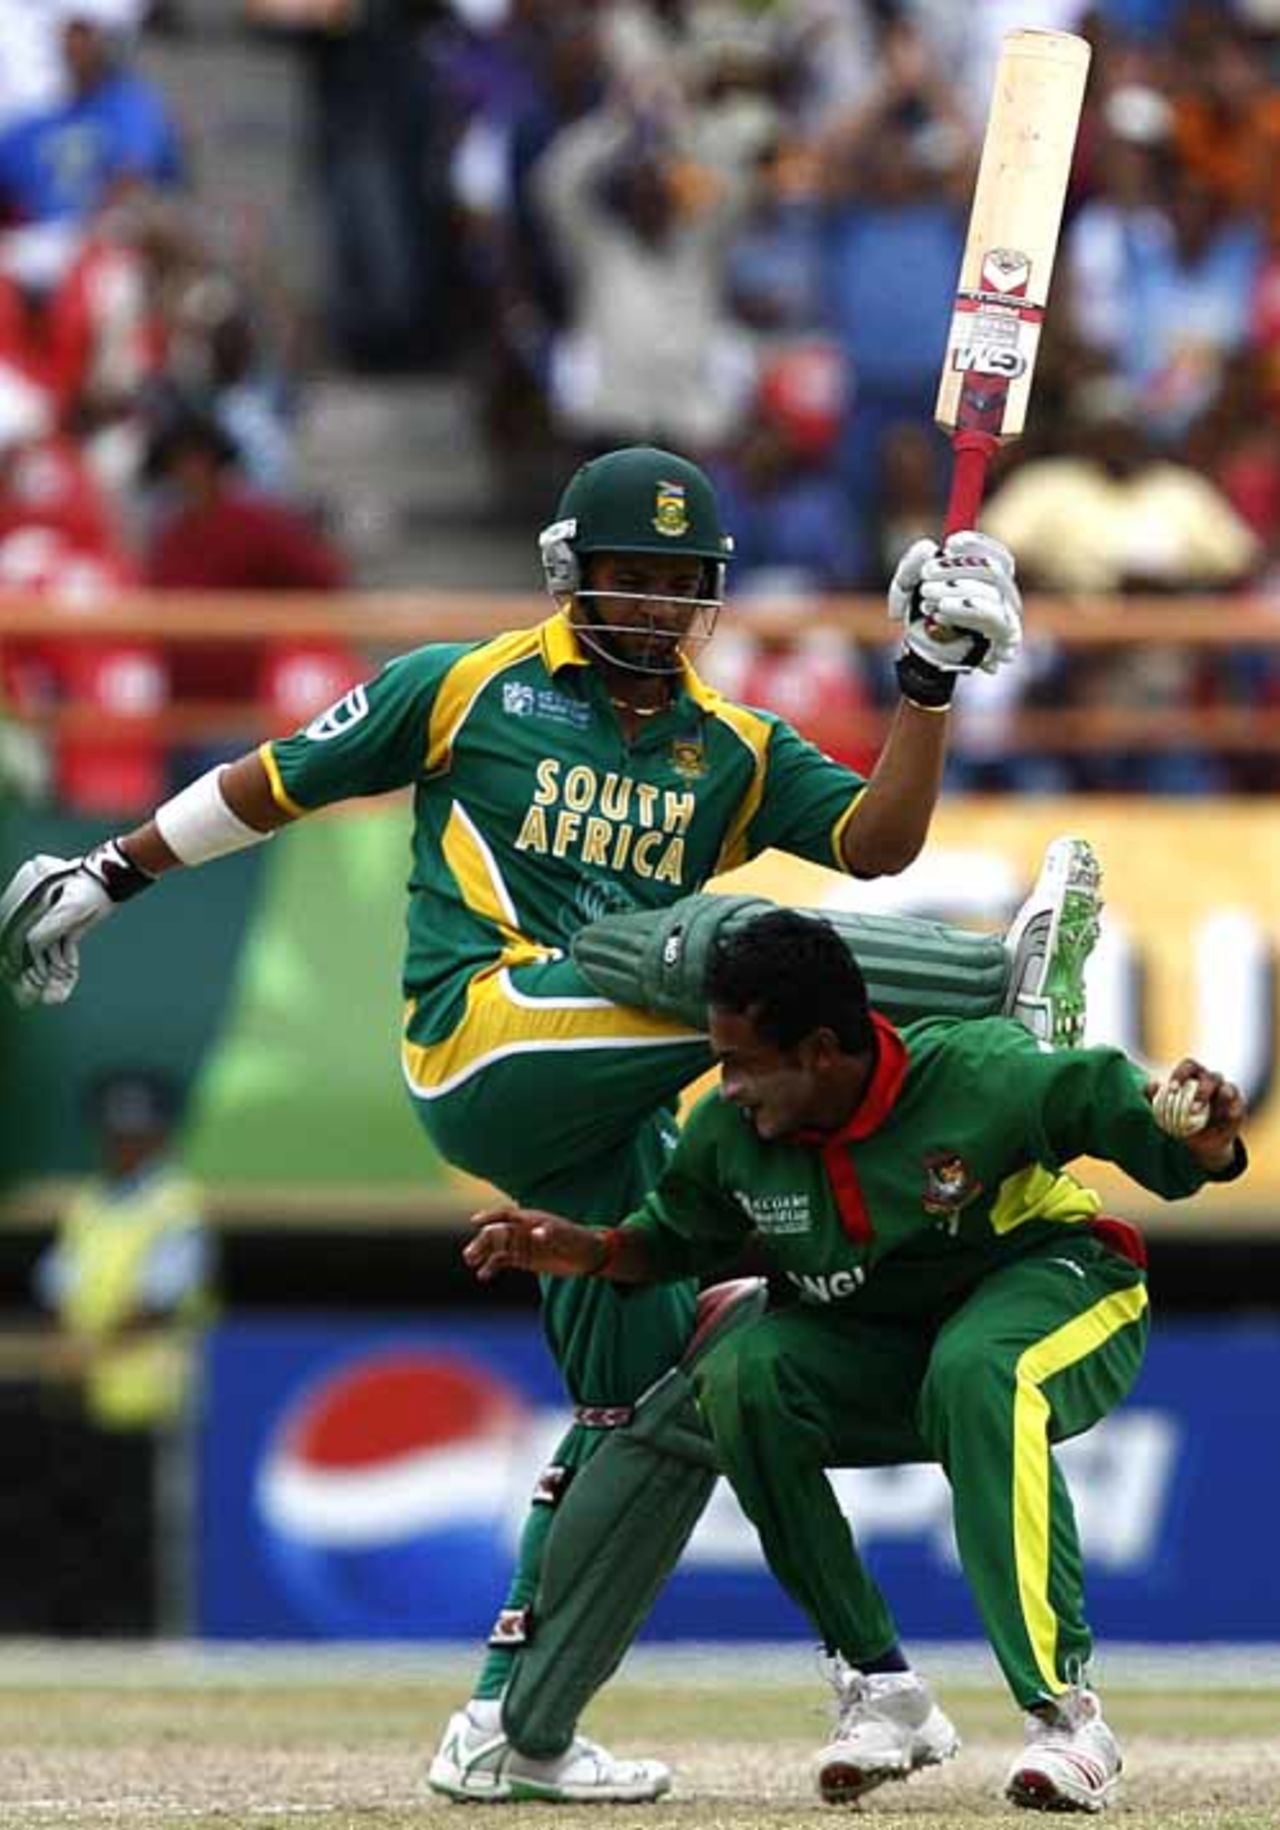 Saqibul Hasan catches Justin Kemp off his own bowling, despite being in a tangle with Ashwell Prince, Bangladesh vs South Africa, Super Eights, Guyana, April 7, 2007